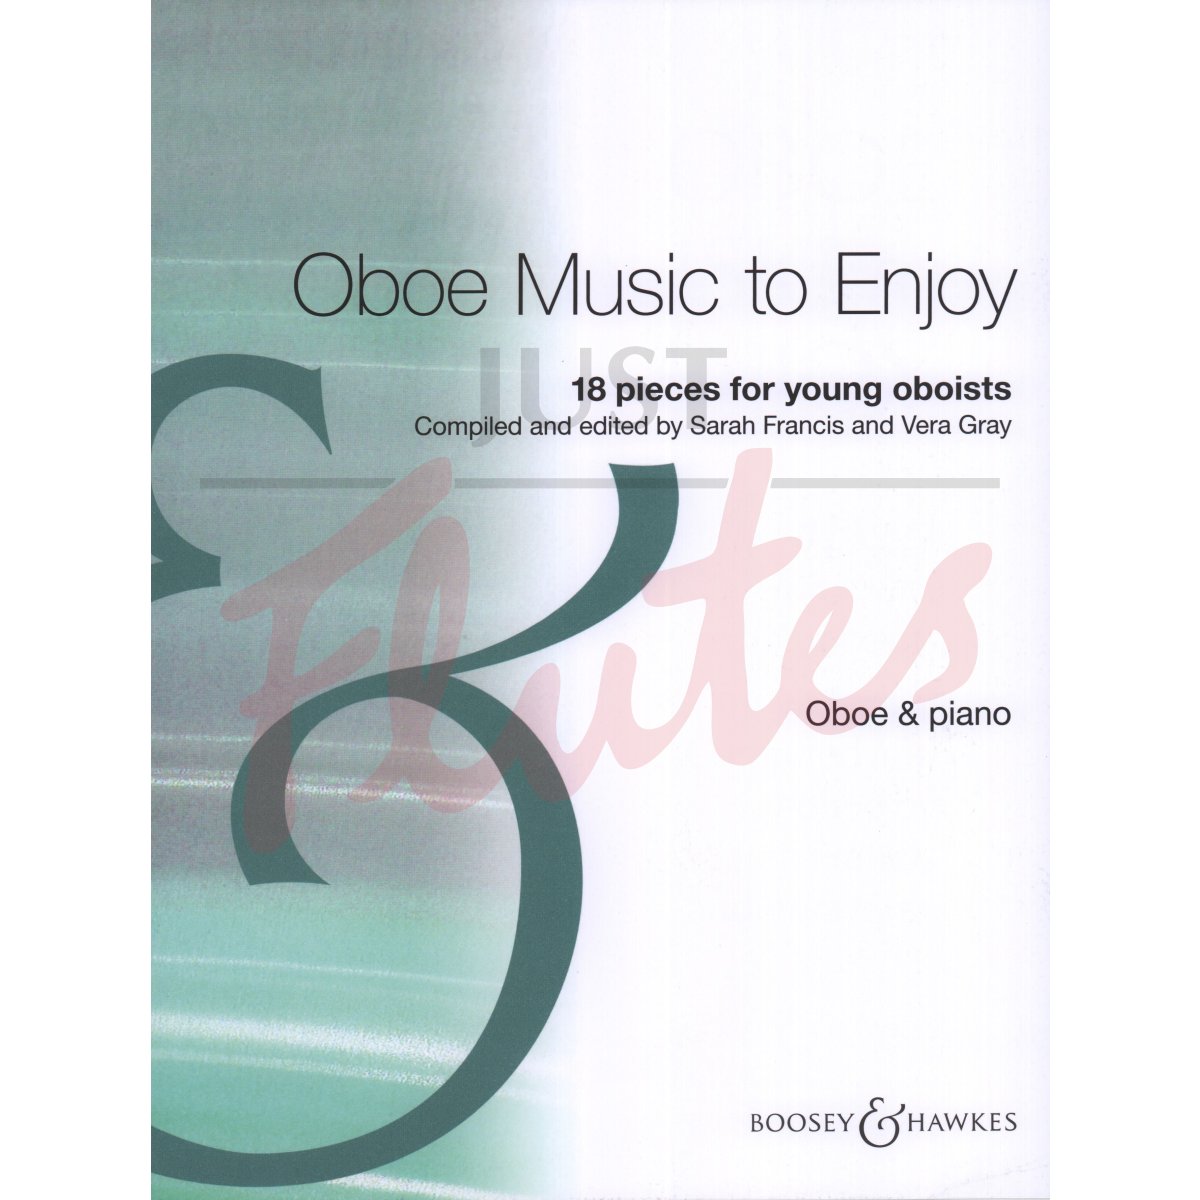 Oboe Music to Enjoy for Oboe and Piano